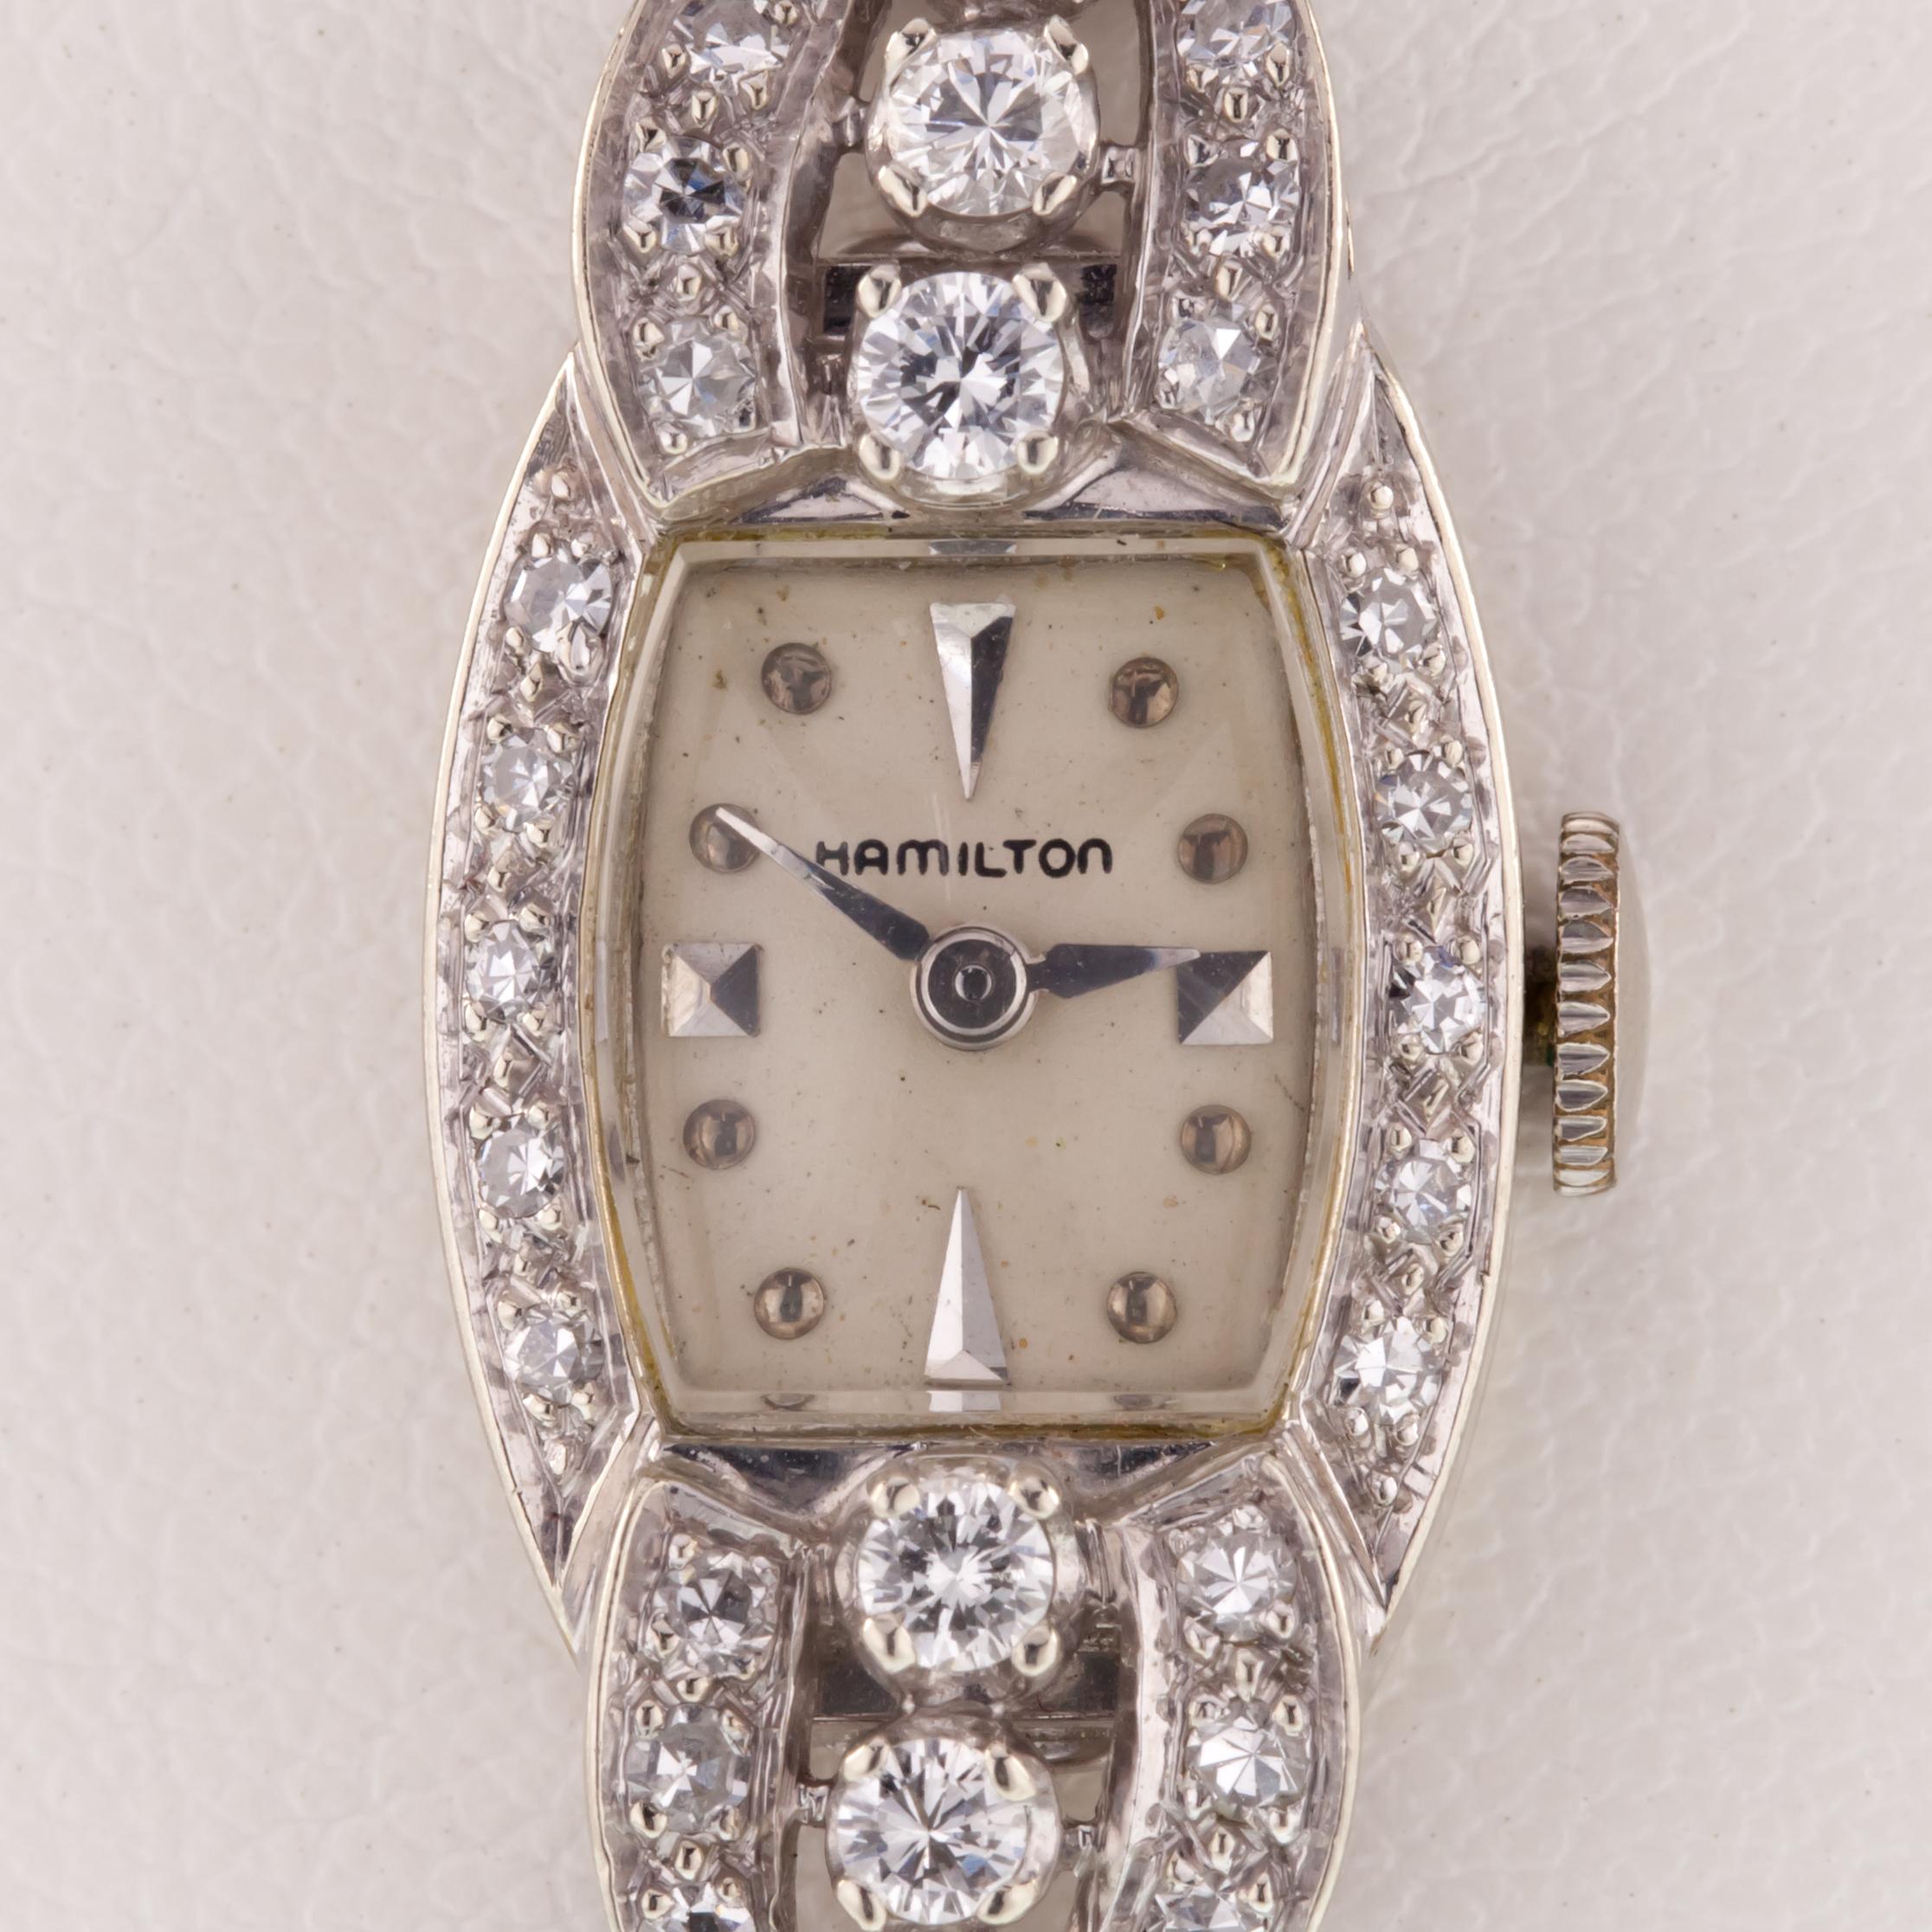 Hamilton Vintage 14k White Gold Women's Diamond Dress Watch
Movement #757
Production Decade: 1950s
14k White Gold Case w/ Diamond Accents
14 mm Wide (15 mm w/ Crown)
Lug-to-Lug Distance = 33 mm
Thickness = 6 mm
Beige Dial w/ Silver Tic Marks and